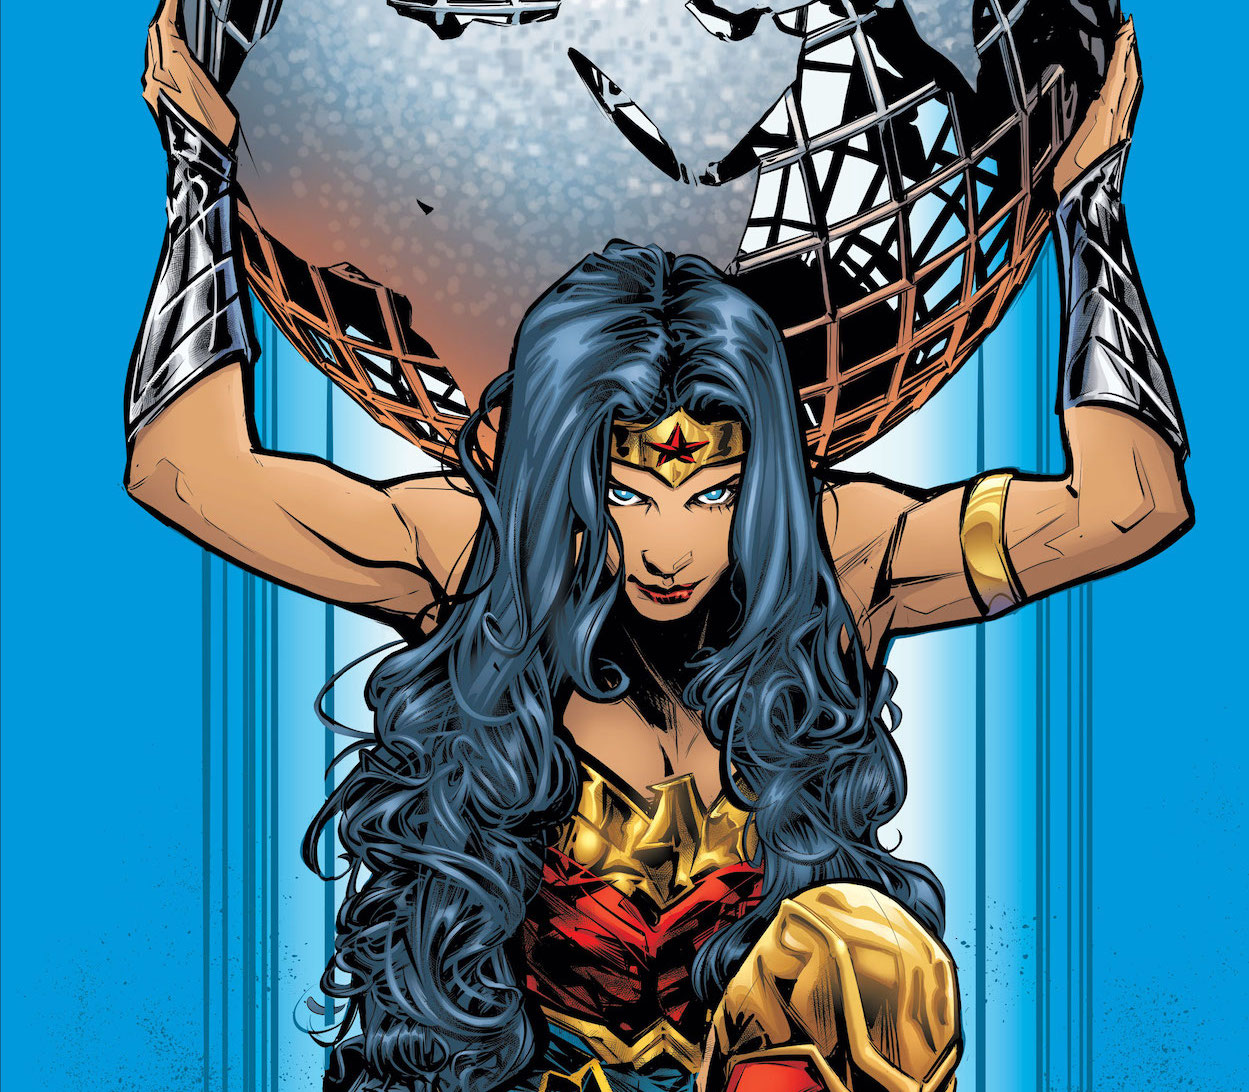 Wonder Woman #750 discussion: The Eternal Mission